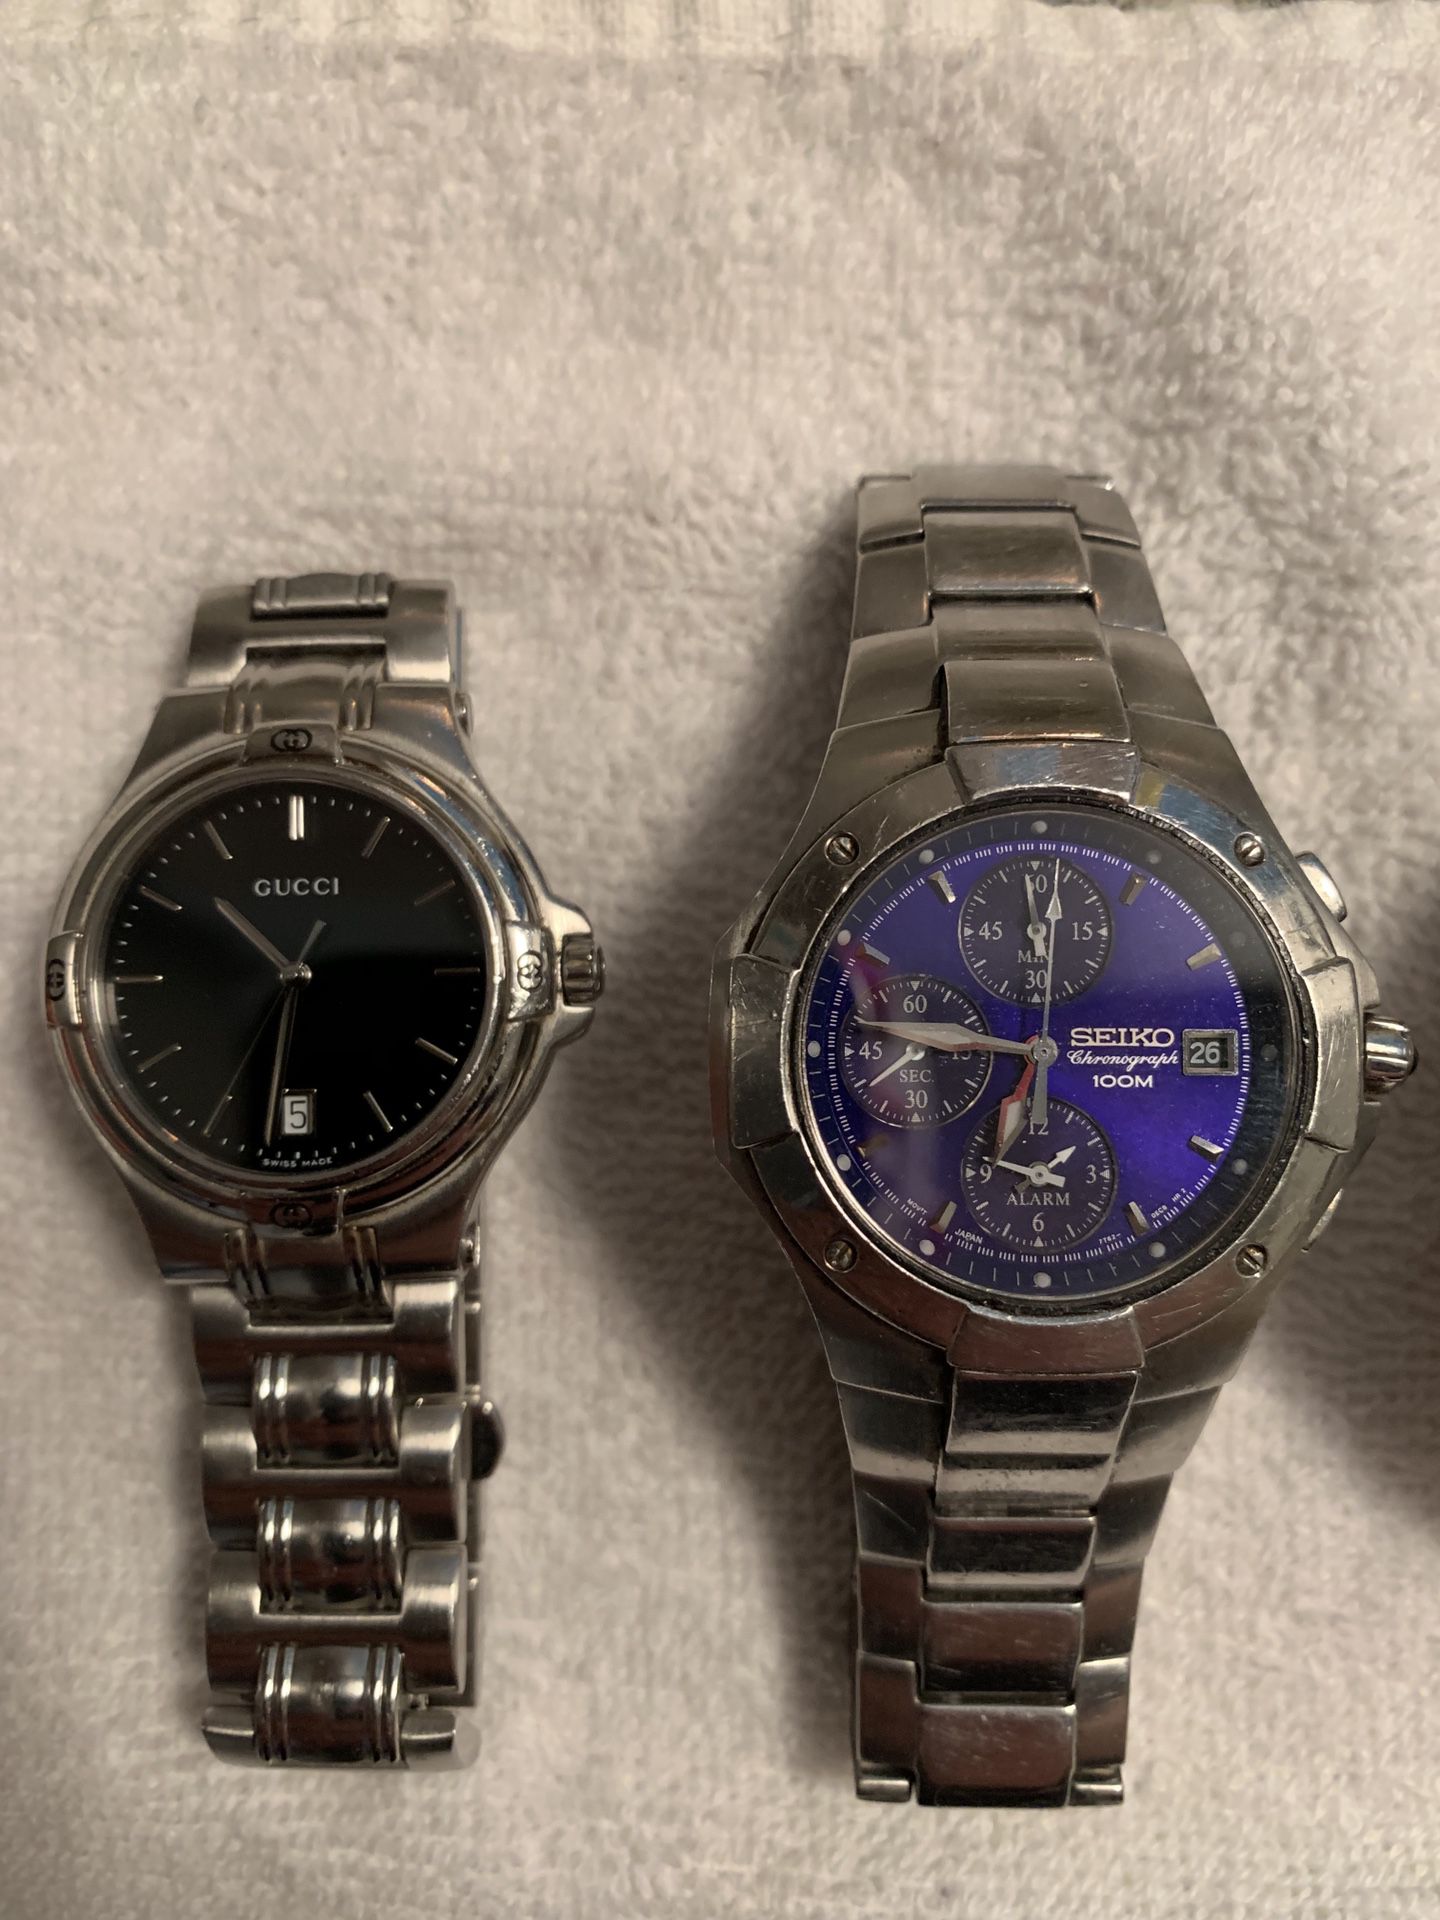 Seiko, Gucci, Fossil, Fossil Ohio State and Mercedes Benz watches